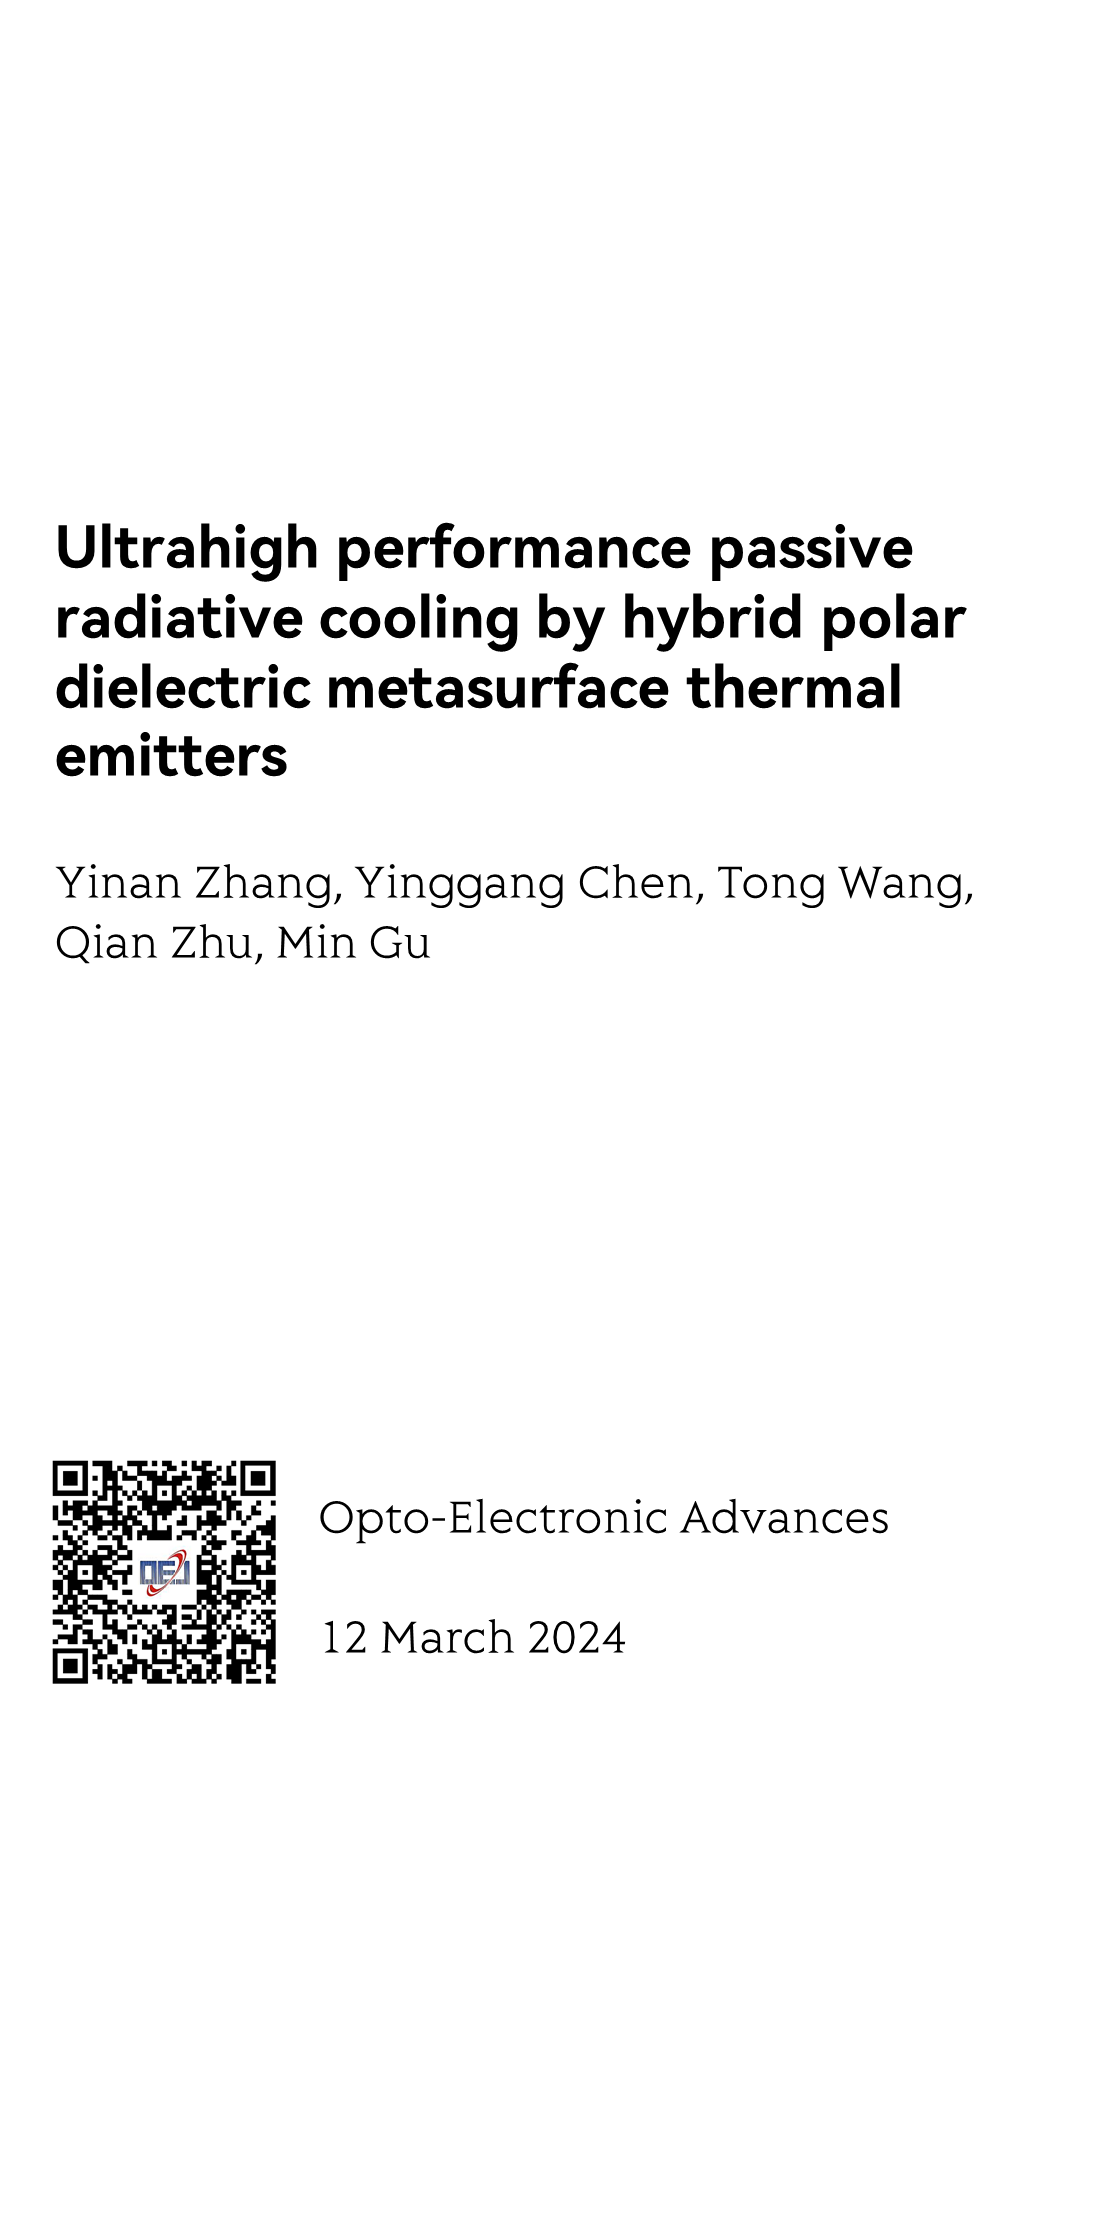 Ultrahigh performance passive radiative cooling by hybrid polar dielectric metasurface thermal emitters_1